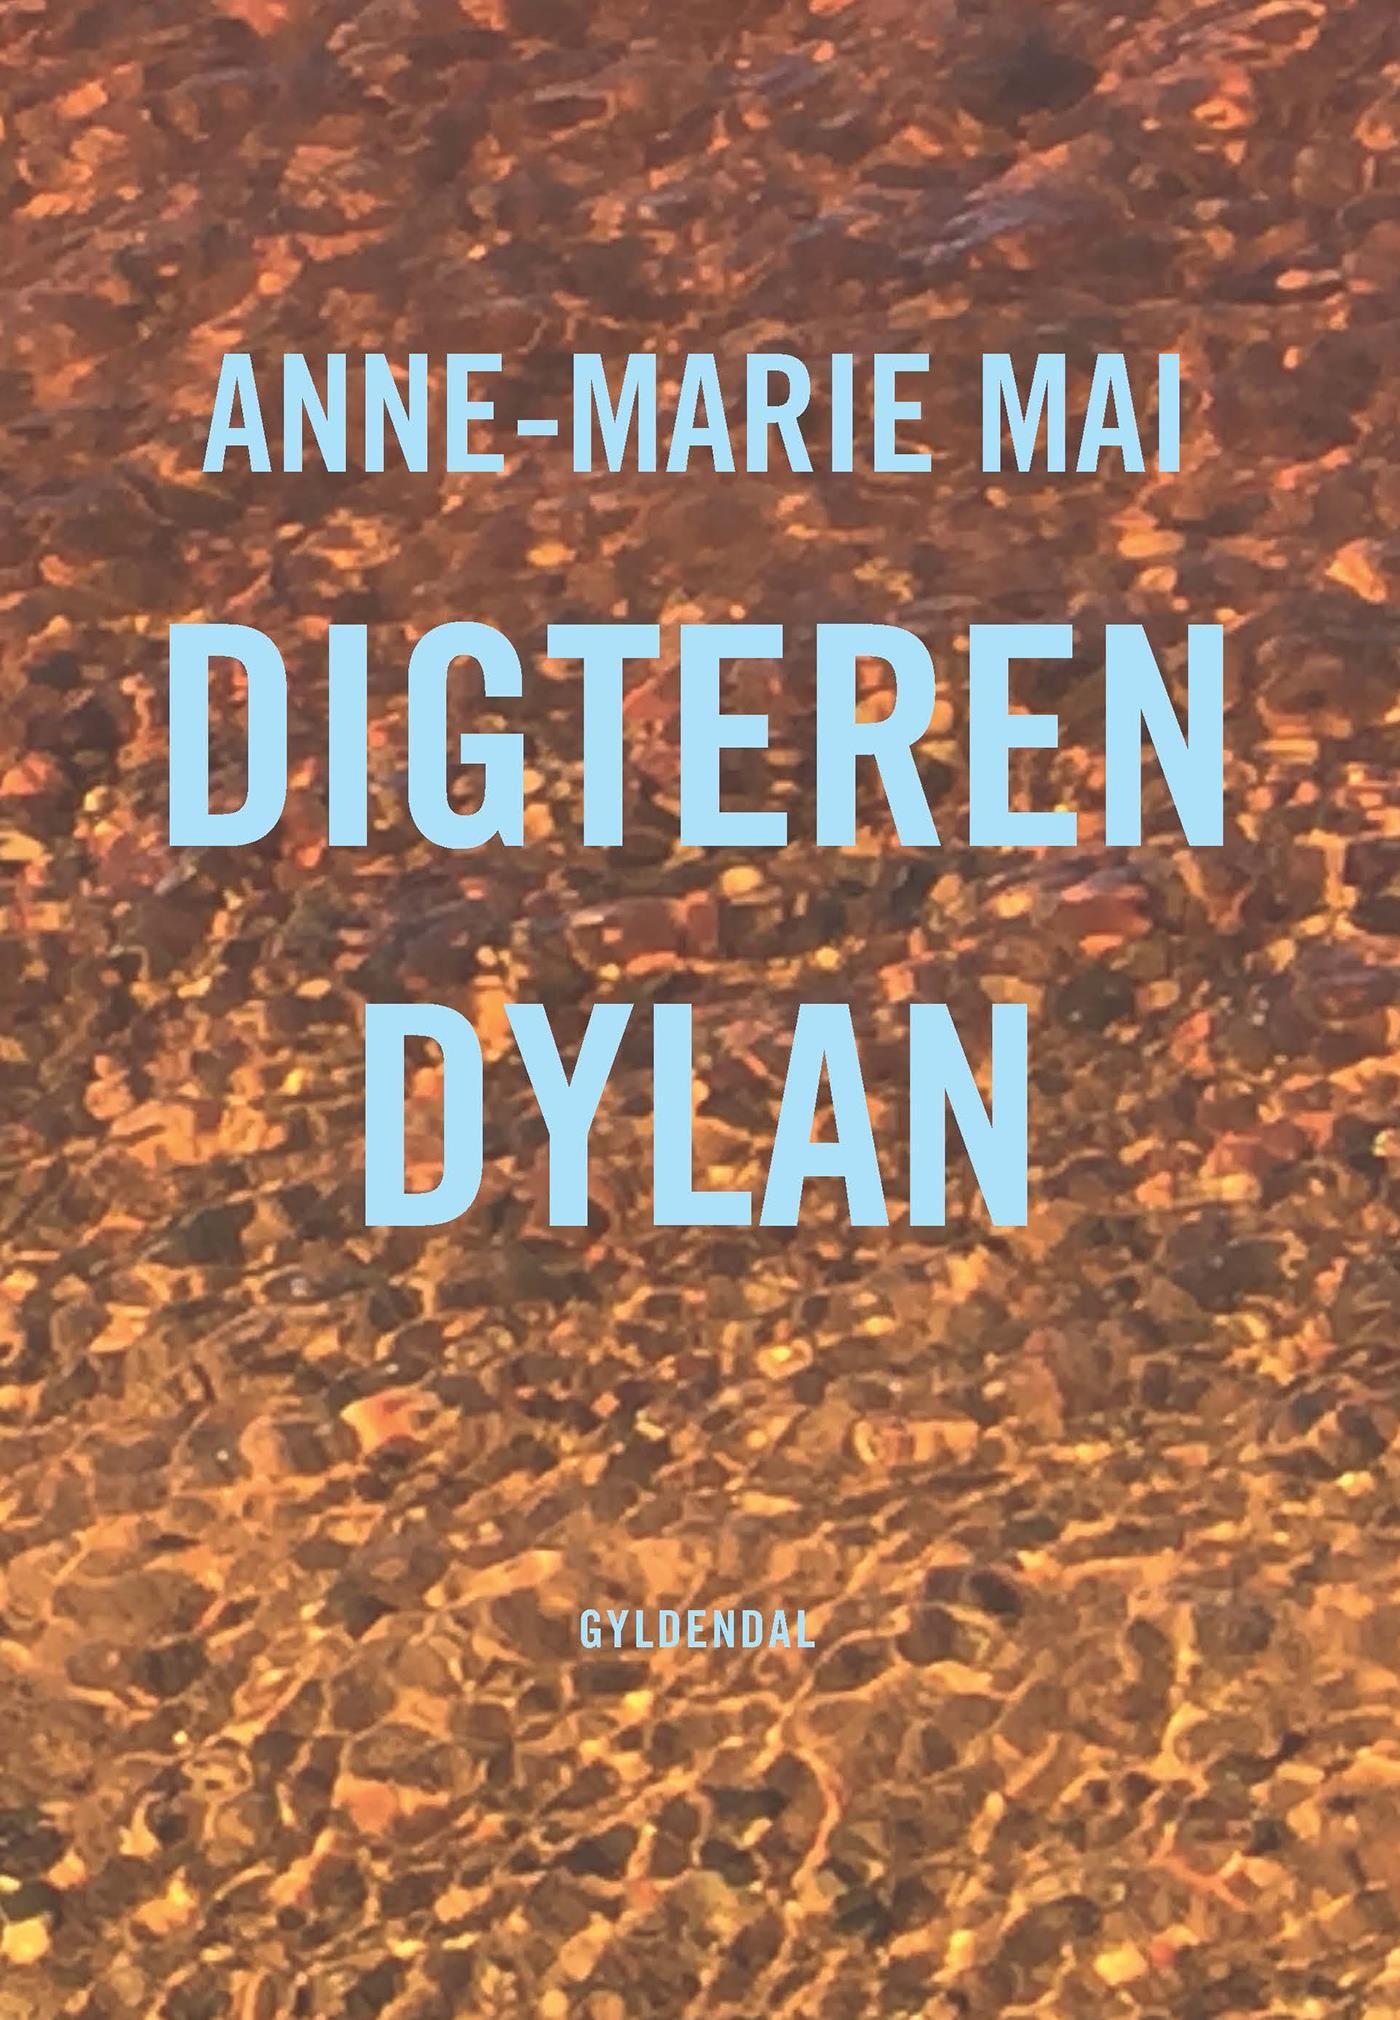 Digteren Dylan, eBook by Anne-Marie Mai